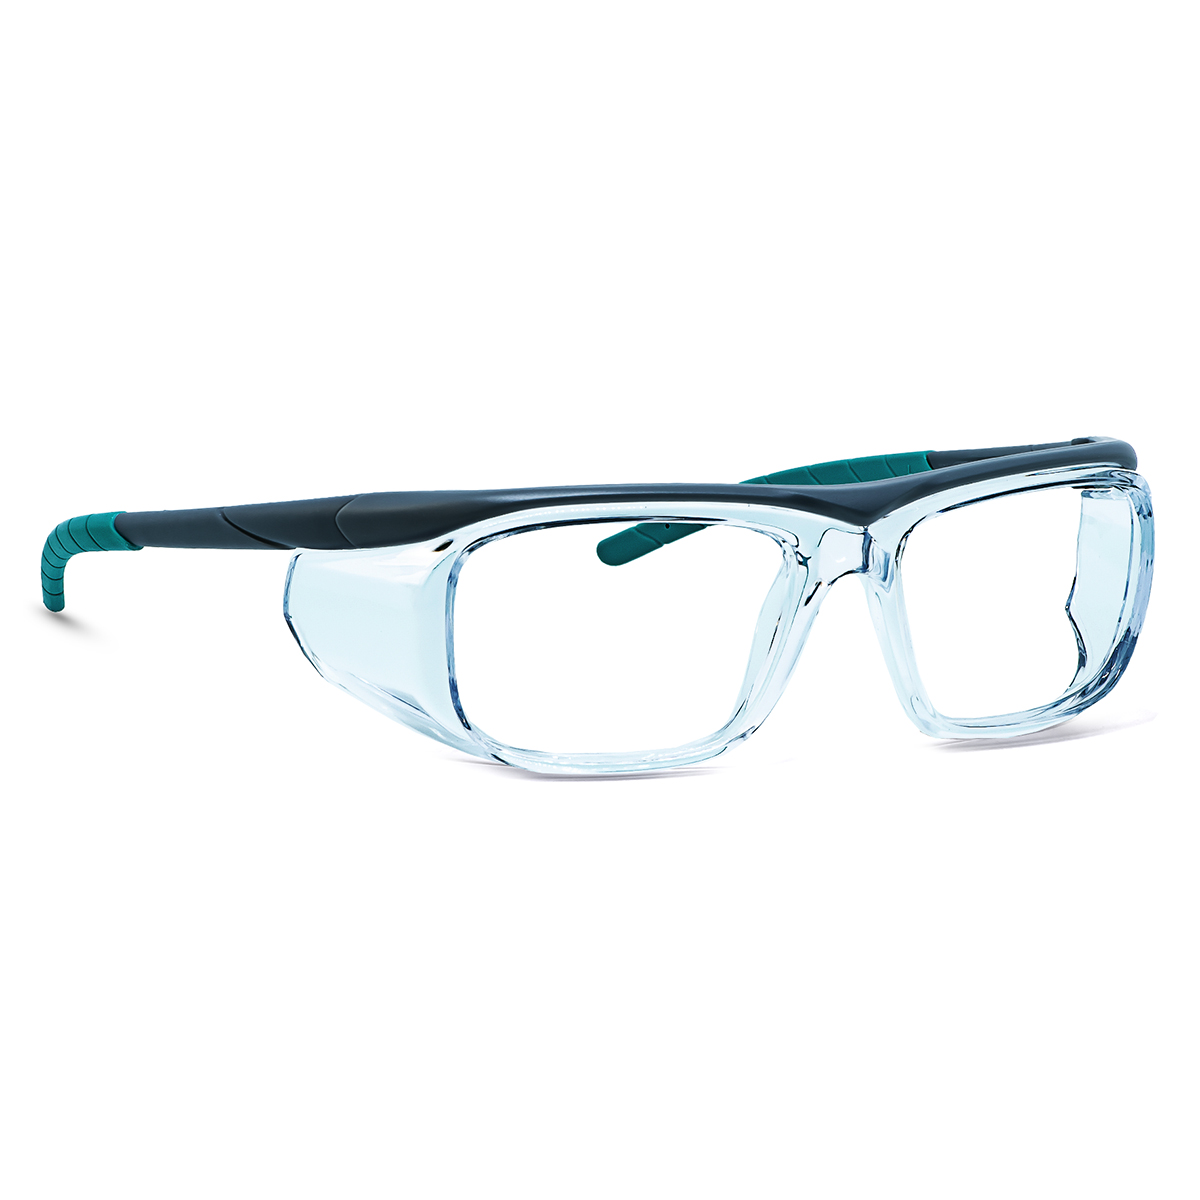 VISION 10 GREY-TURQUOISE GR. 55-17